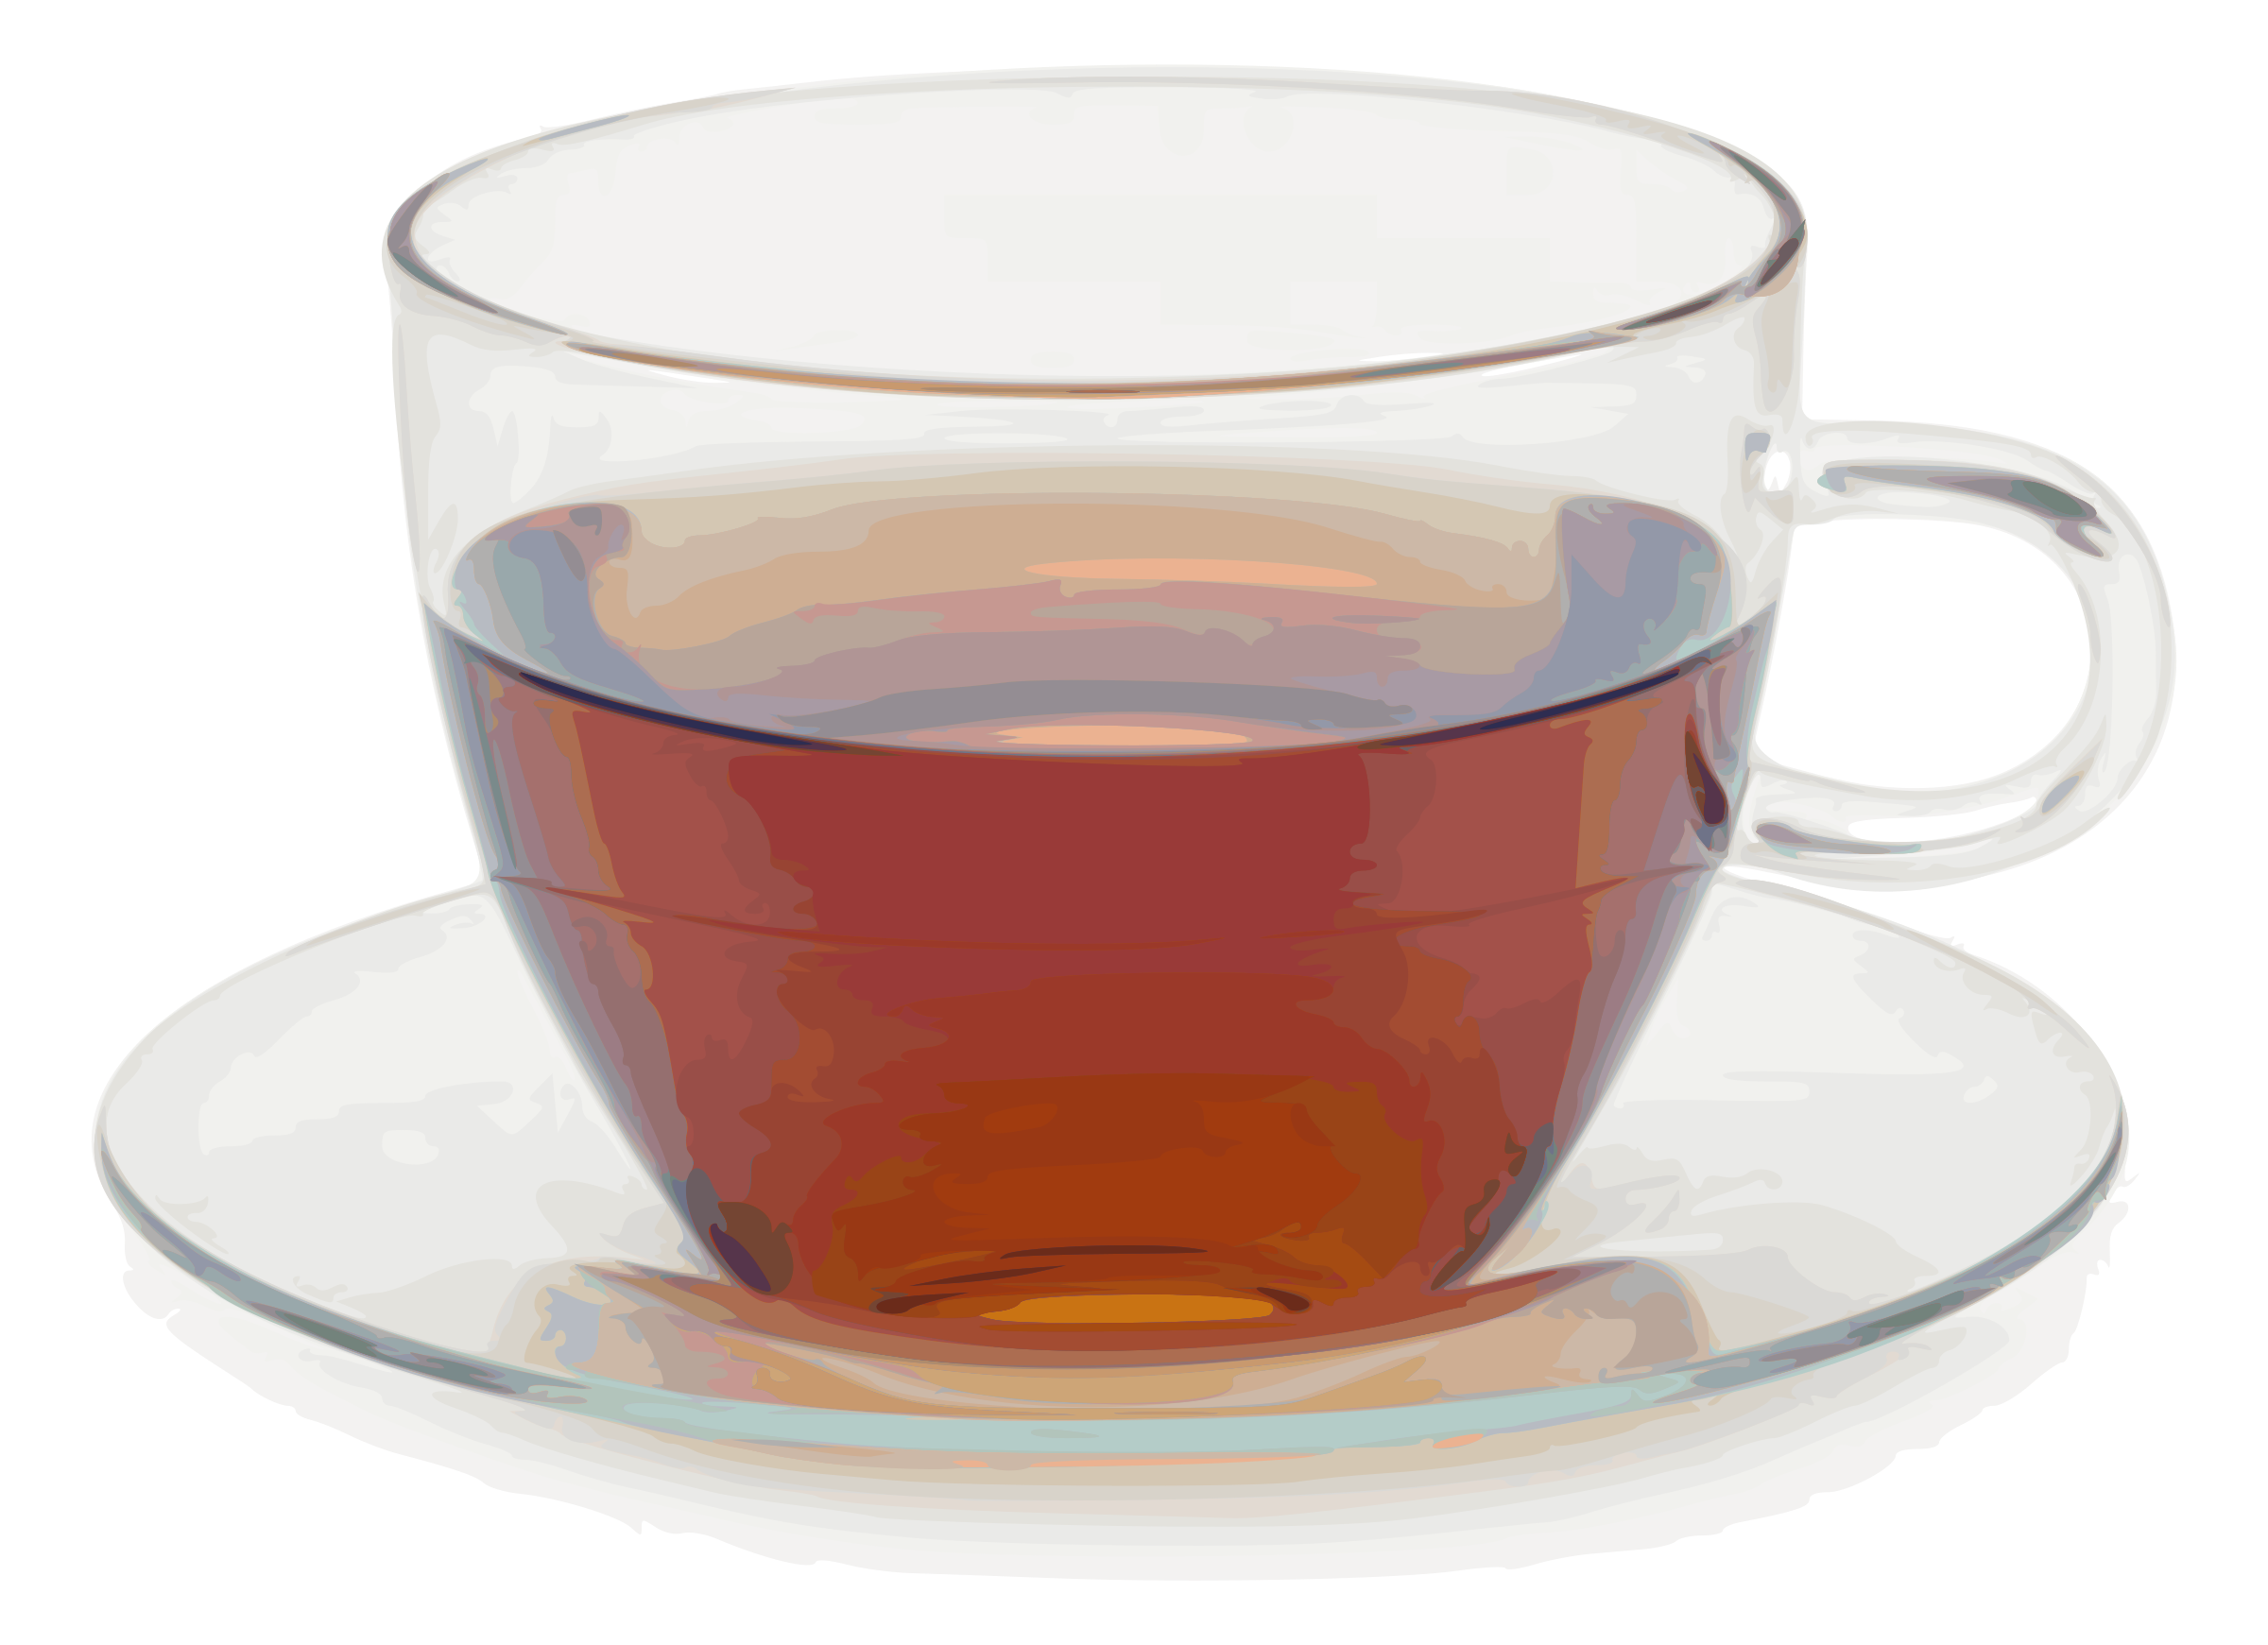 Cup Png Transparent Image - Cup, Transparent background PNG HD thumbnail